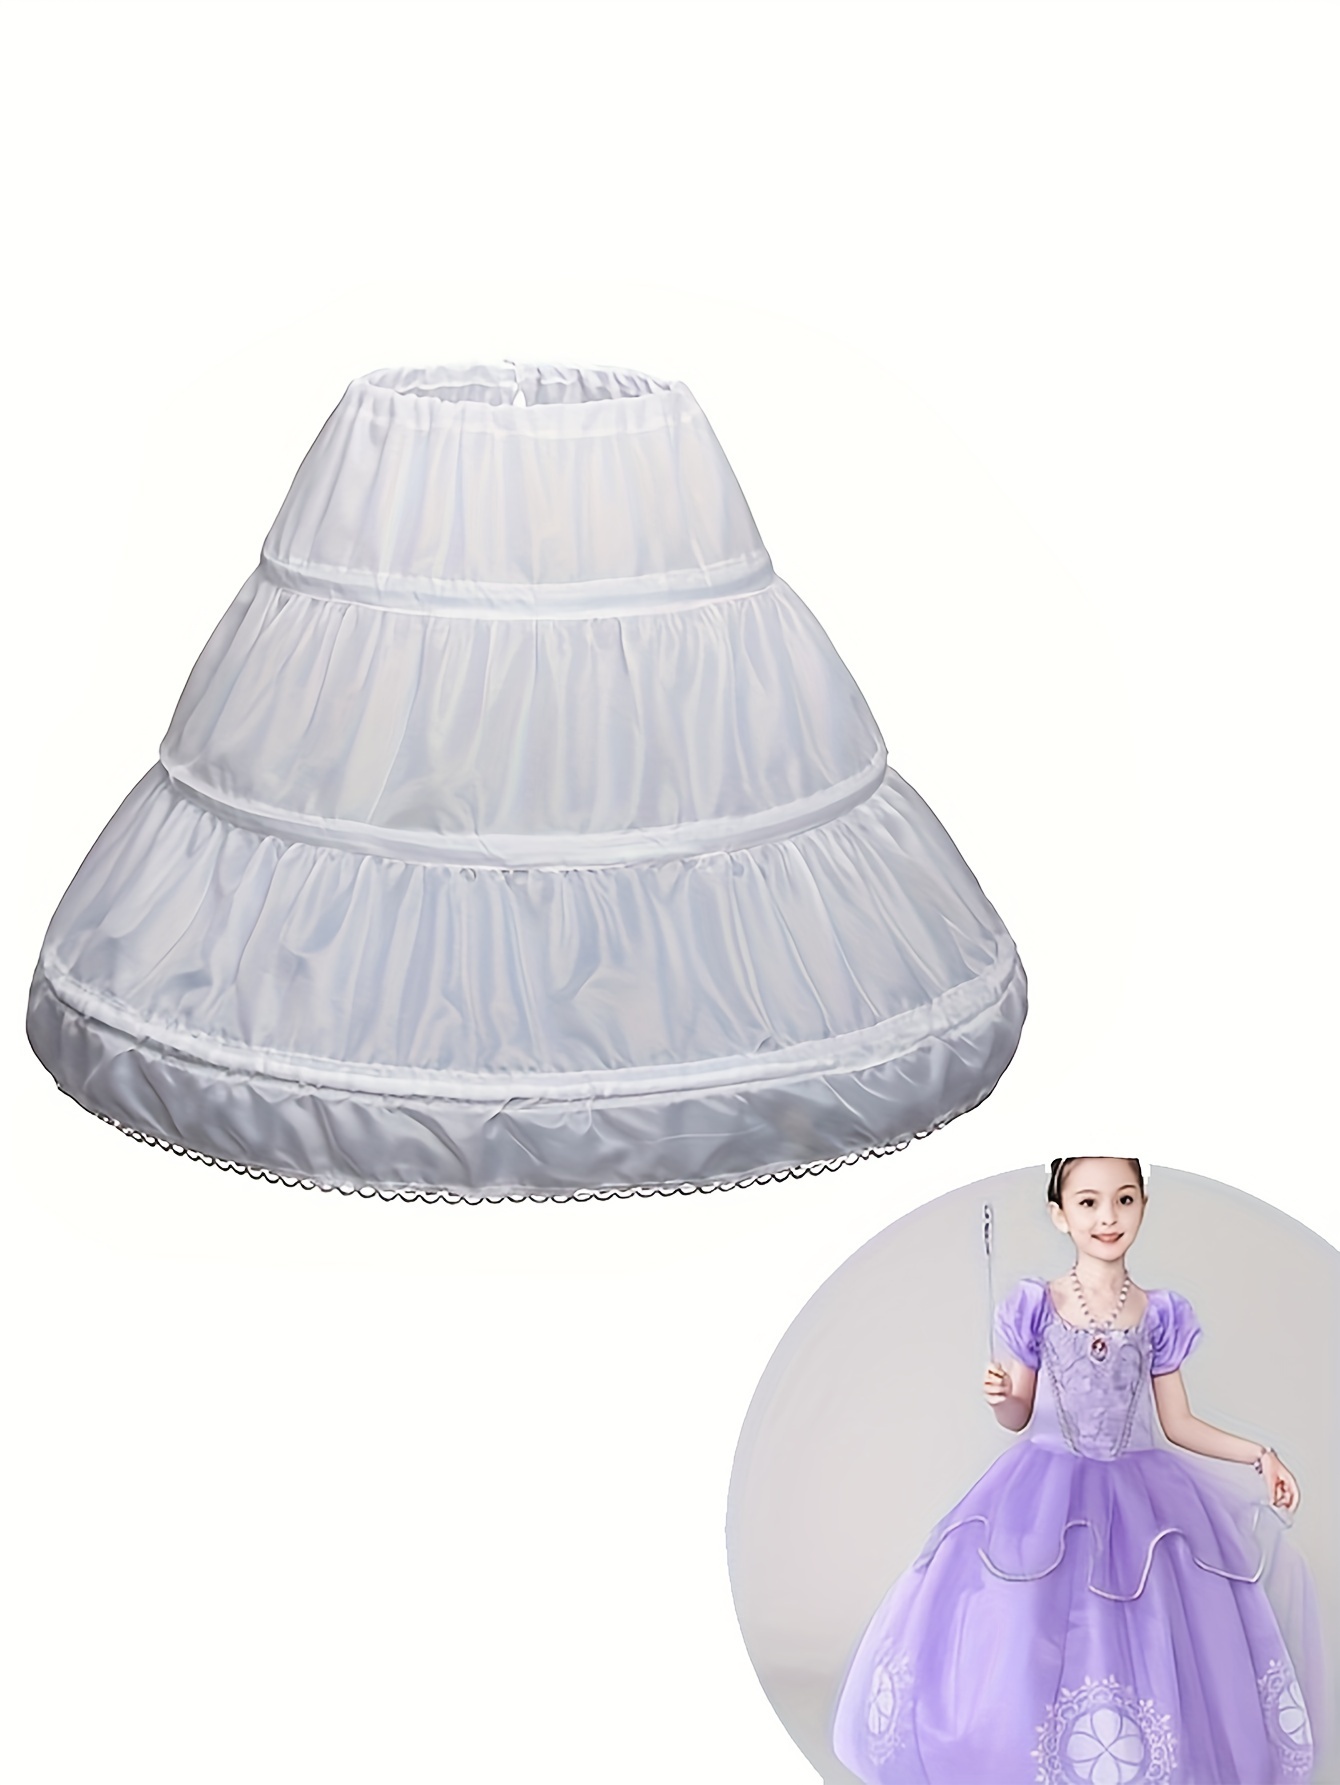 Short Skirt 2 Layers Petticoat Vintage Solid Color Inside Skirt Party  Princess Dress Up Clothes Lining Accessories